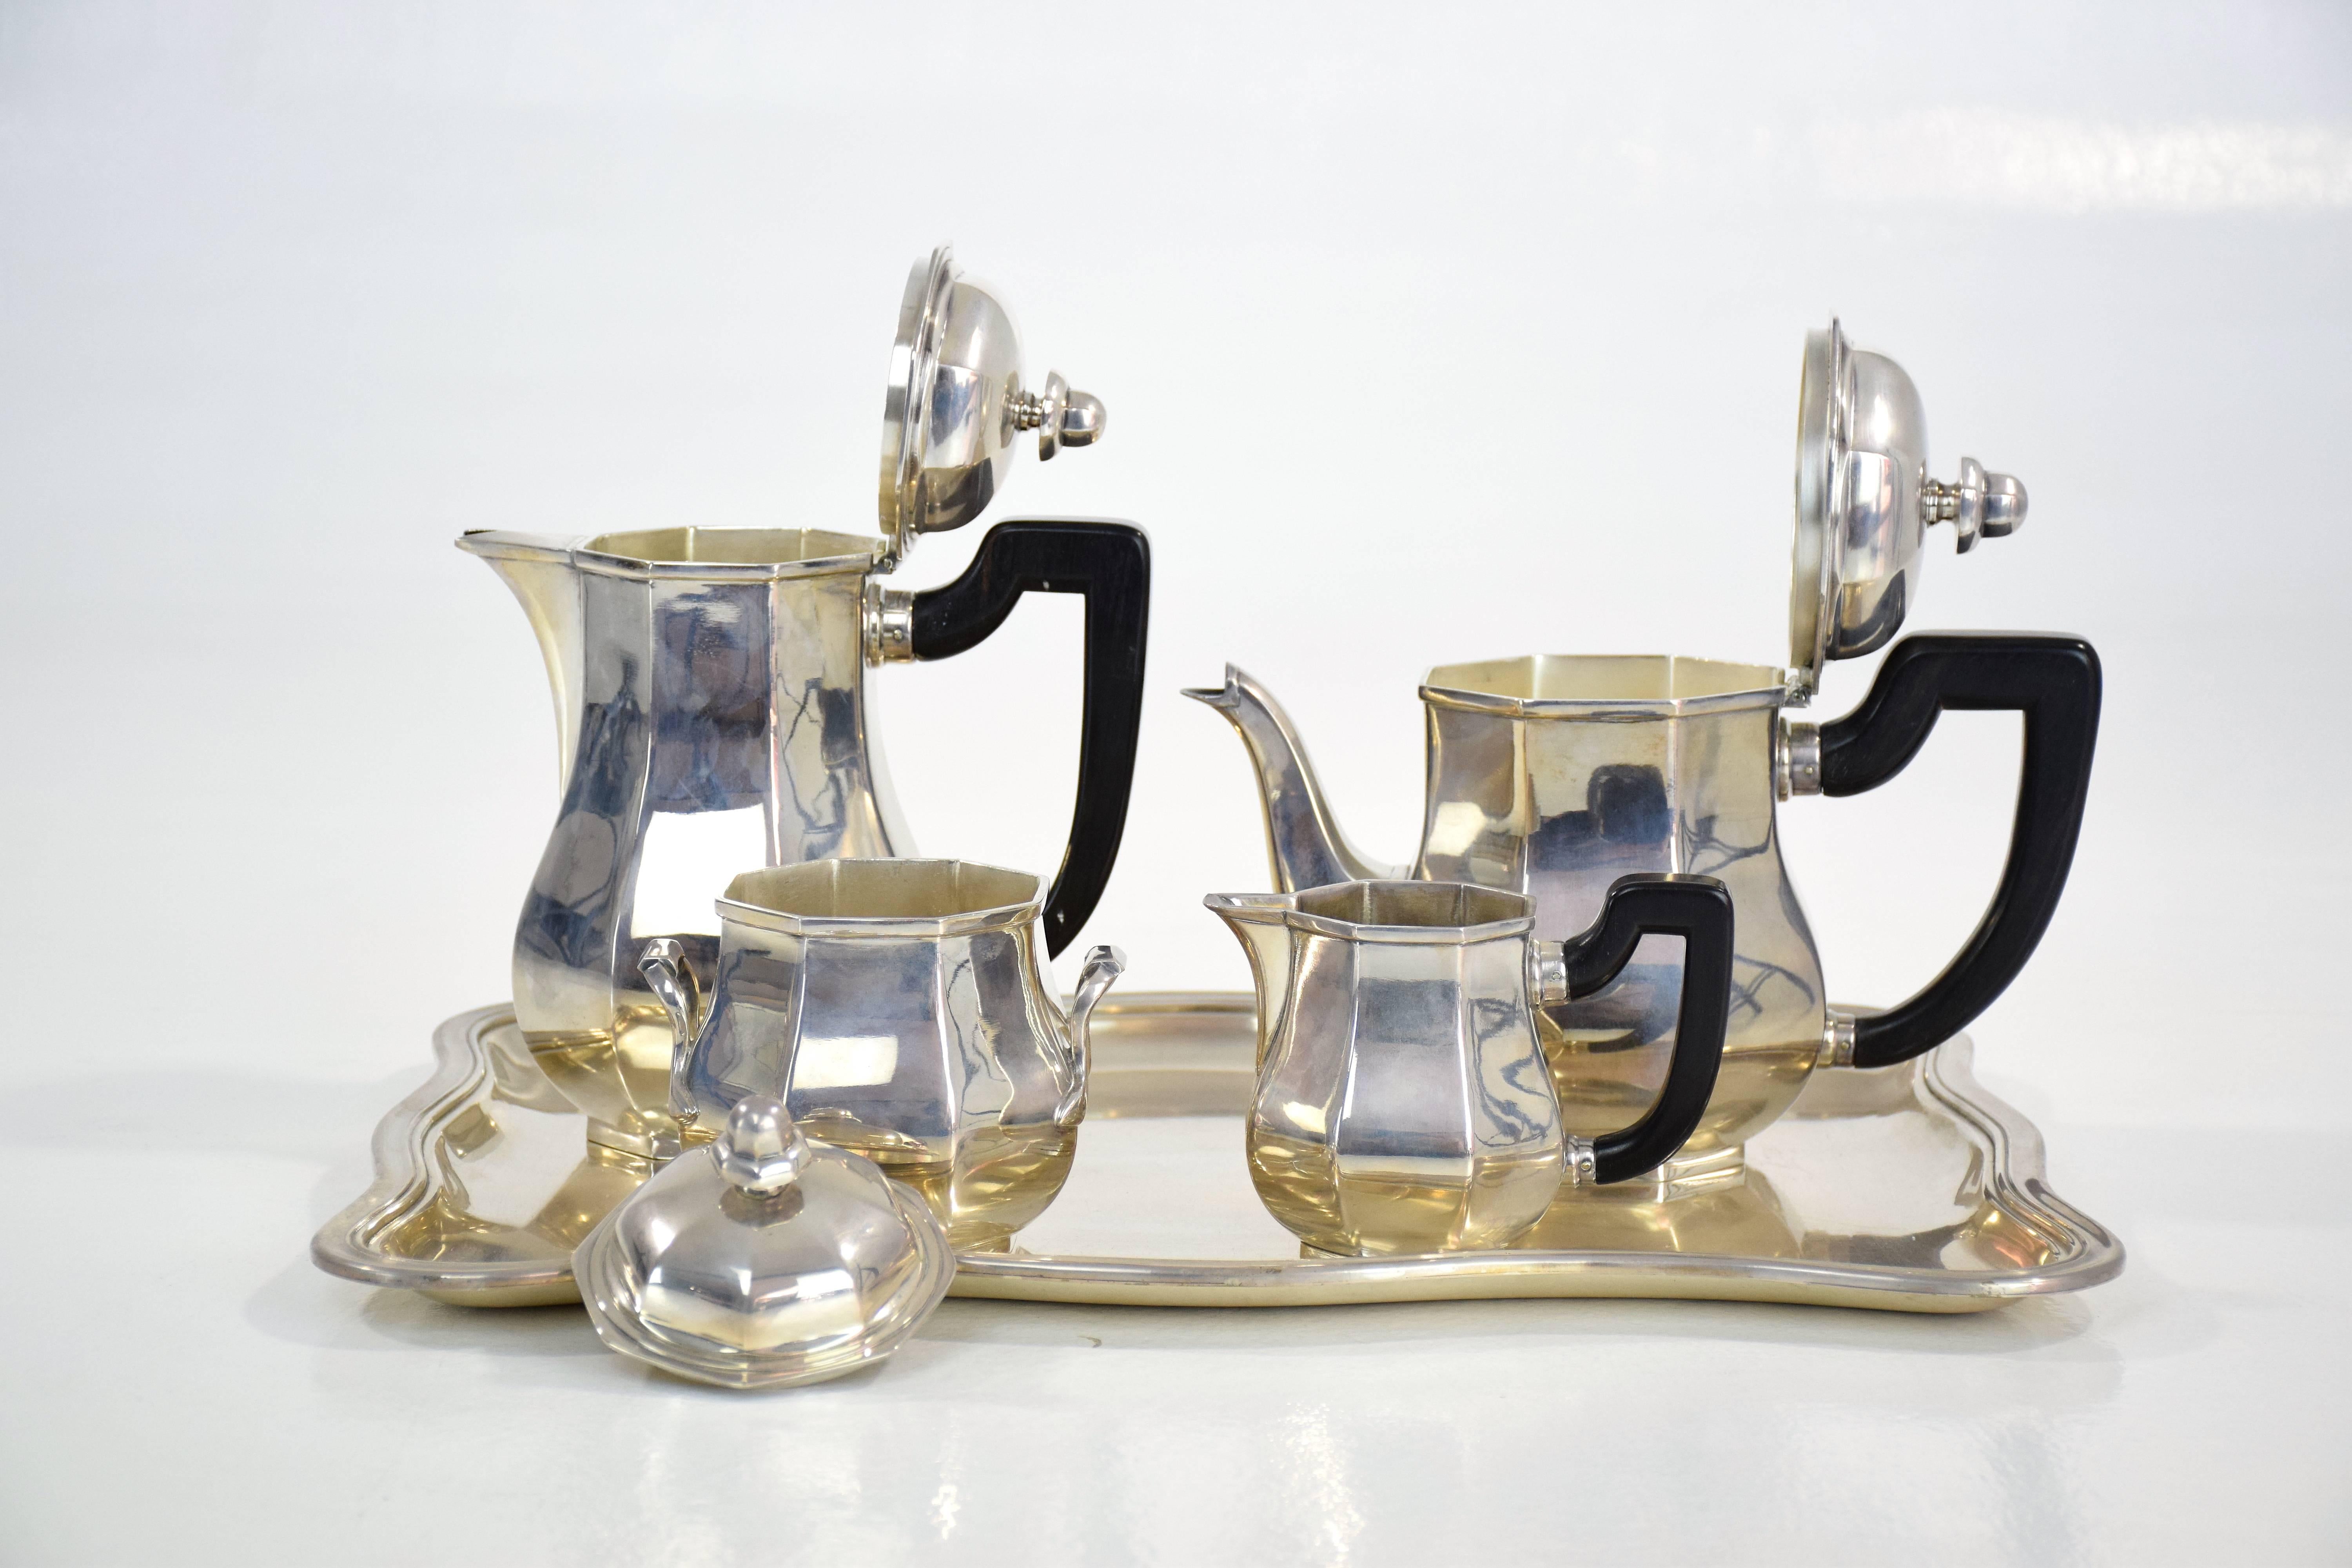 Elegant Art Deco four-piece silver plated tea service by renown french maker Ercuis, 
France, circa 1930s-1940s. 
Composed of a teapot, a coffee pot, a lidded sugar bowl and a cream pitcher. 
All stamped.
----
All our pieces are fully restored at